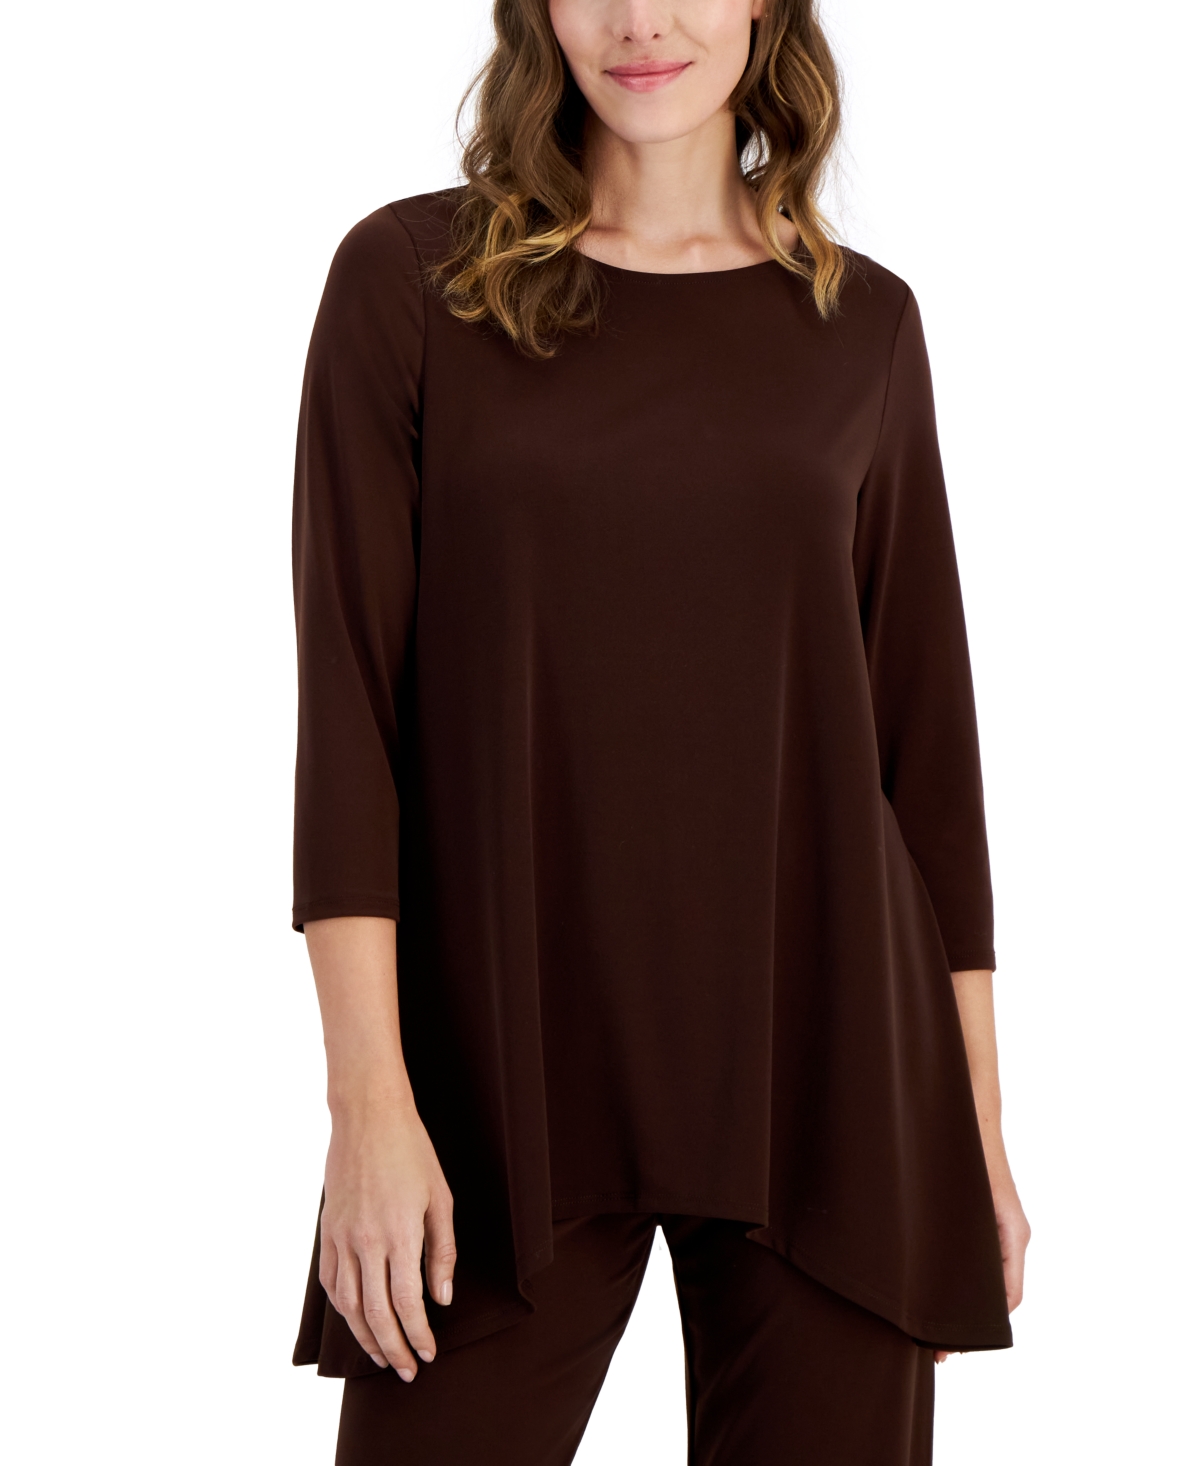 Women's 3/4-Sleeve Knit Top, Created for Macy's - Firewood